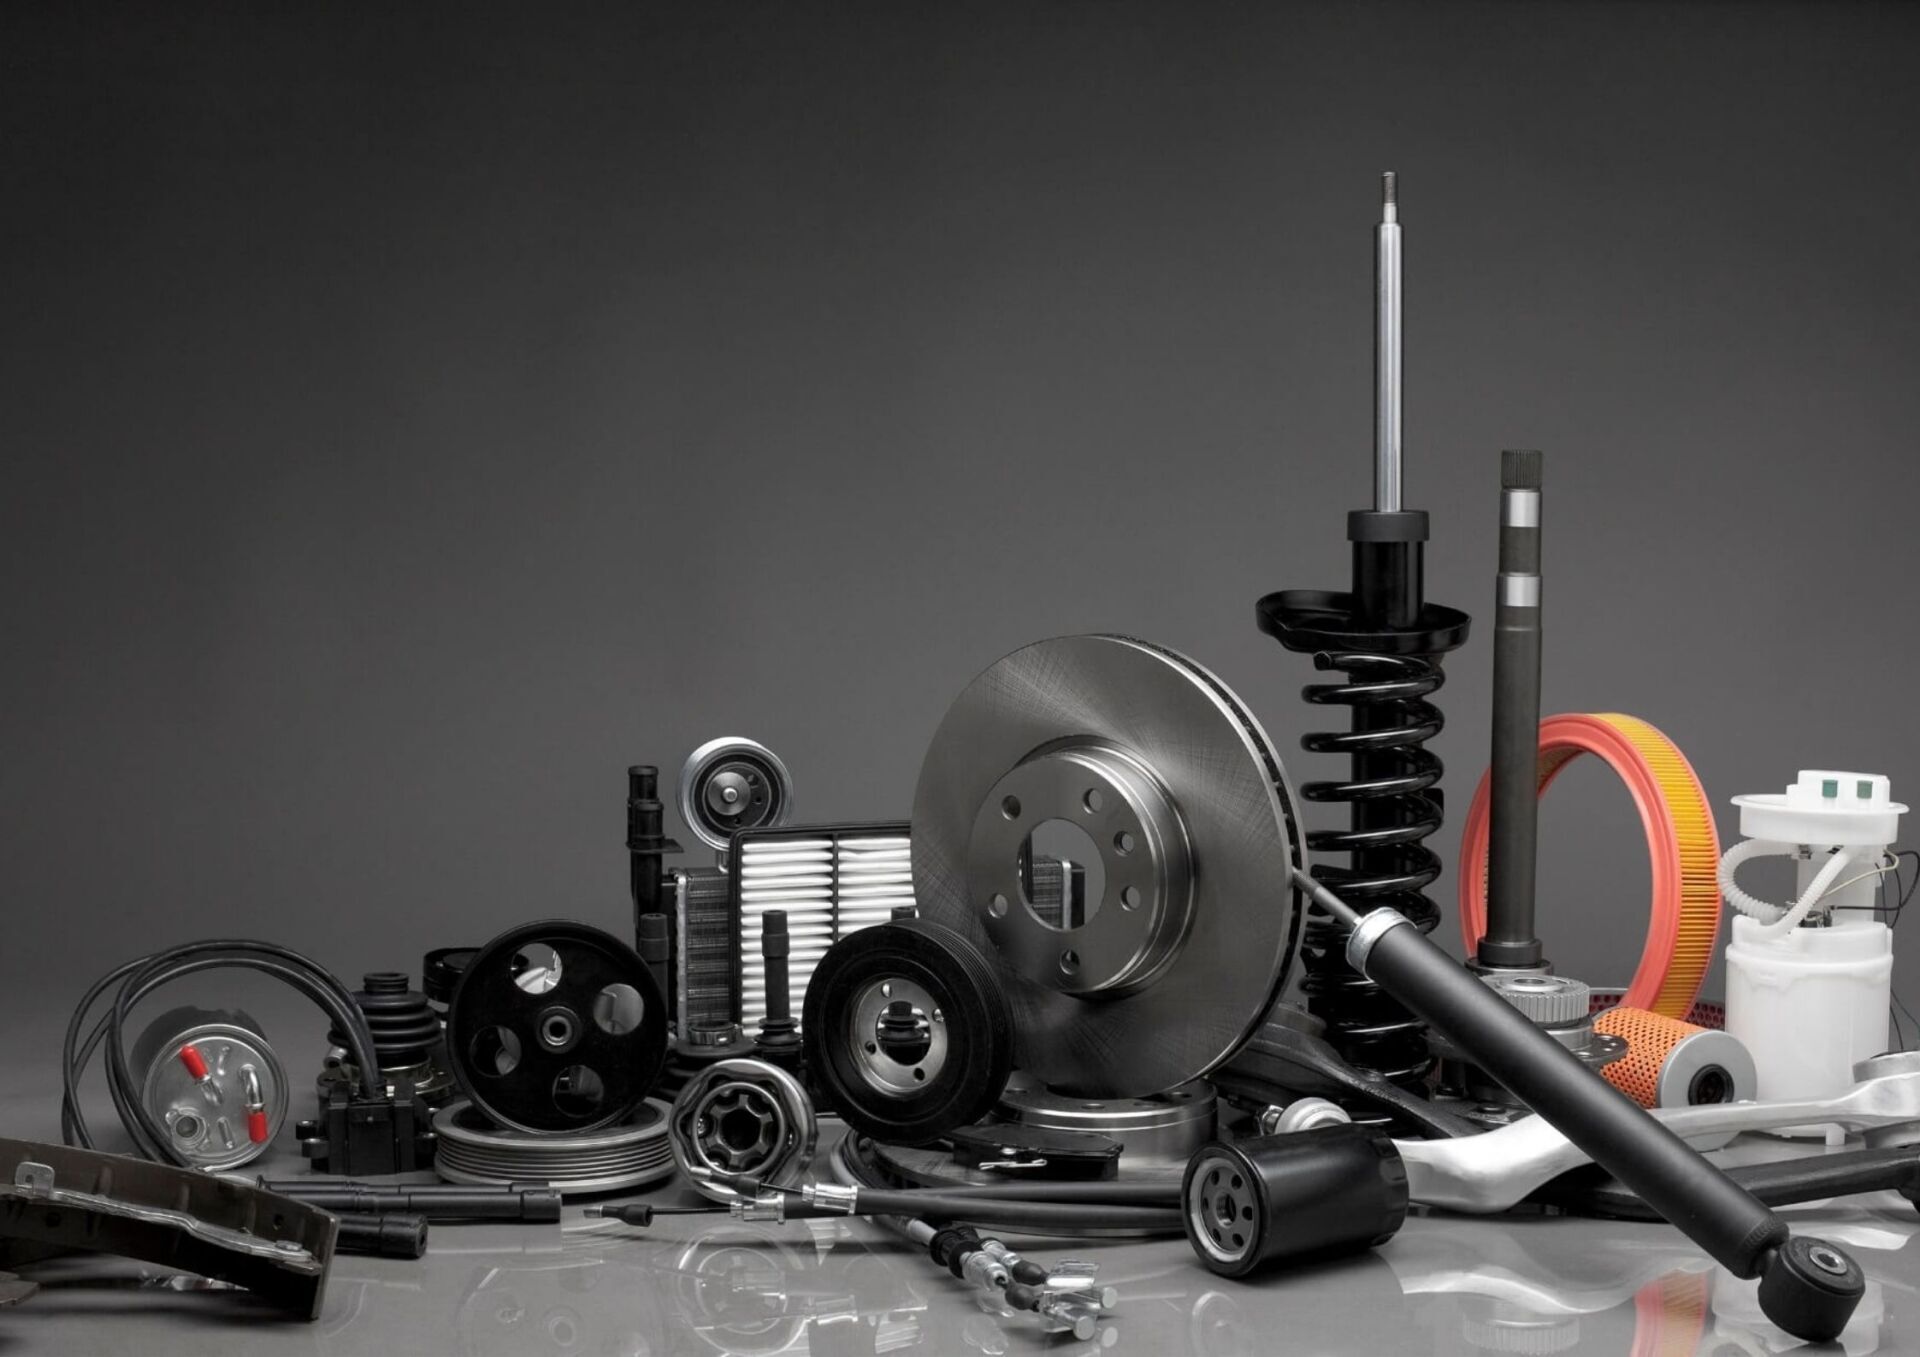 Workbench full of vehicle parts